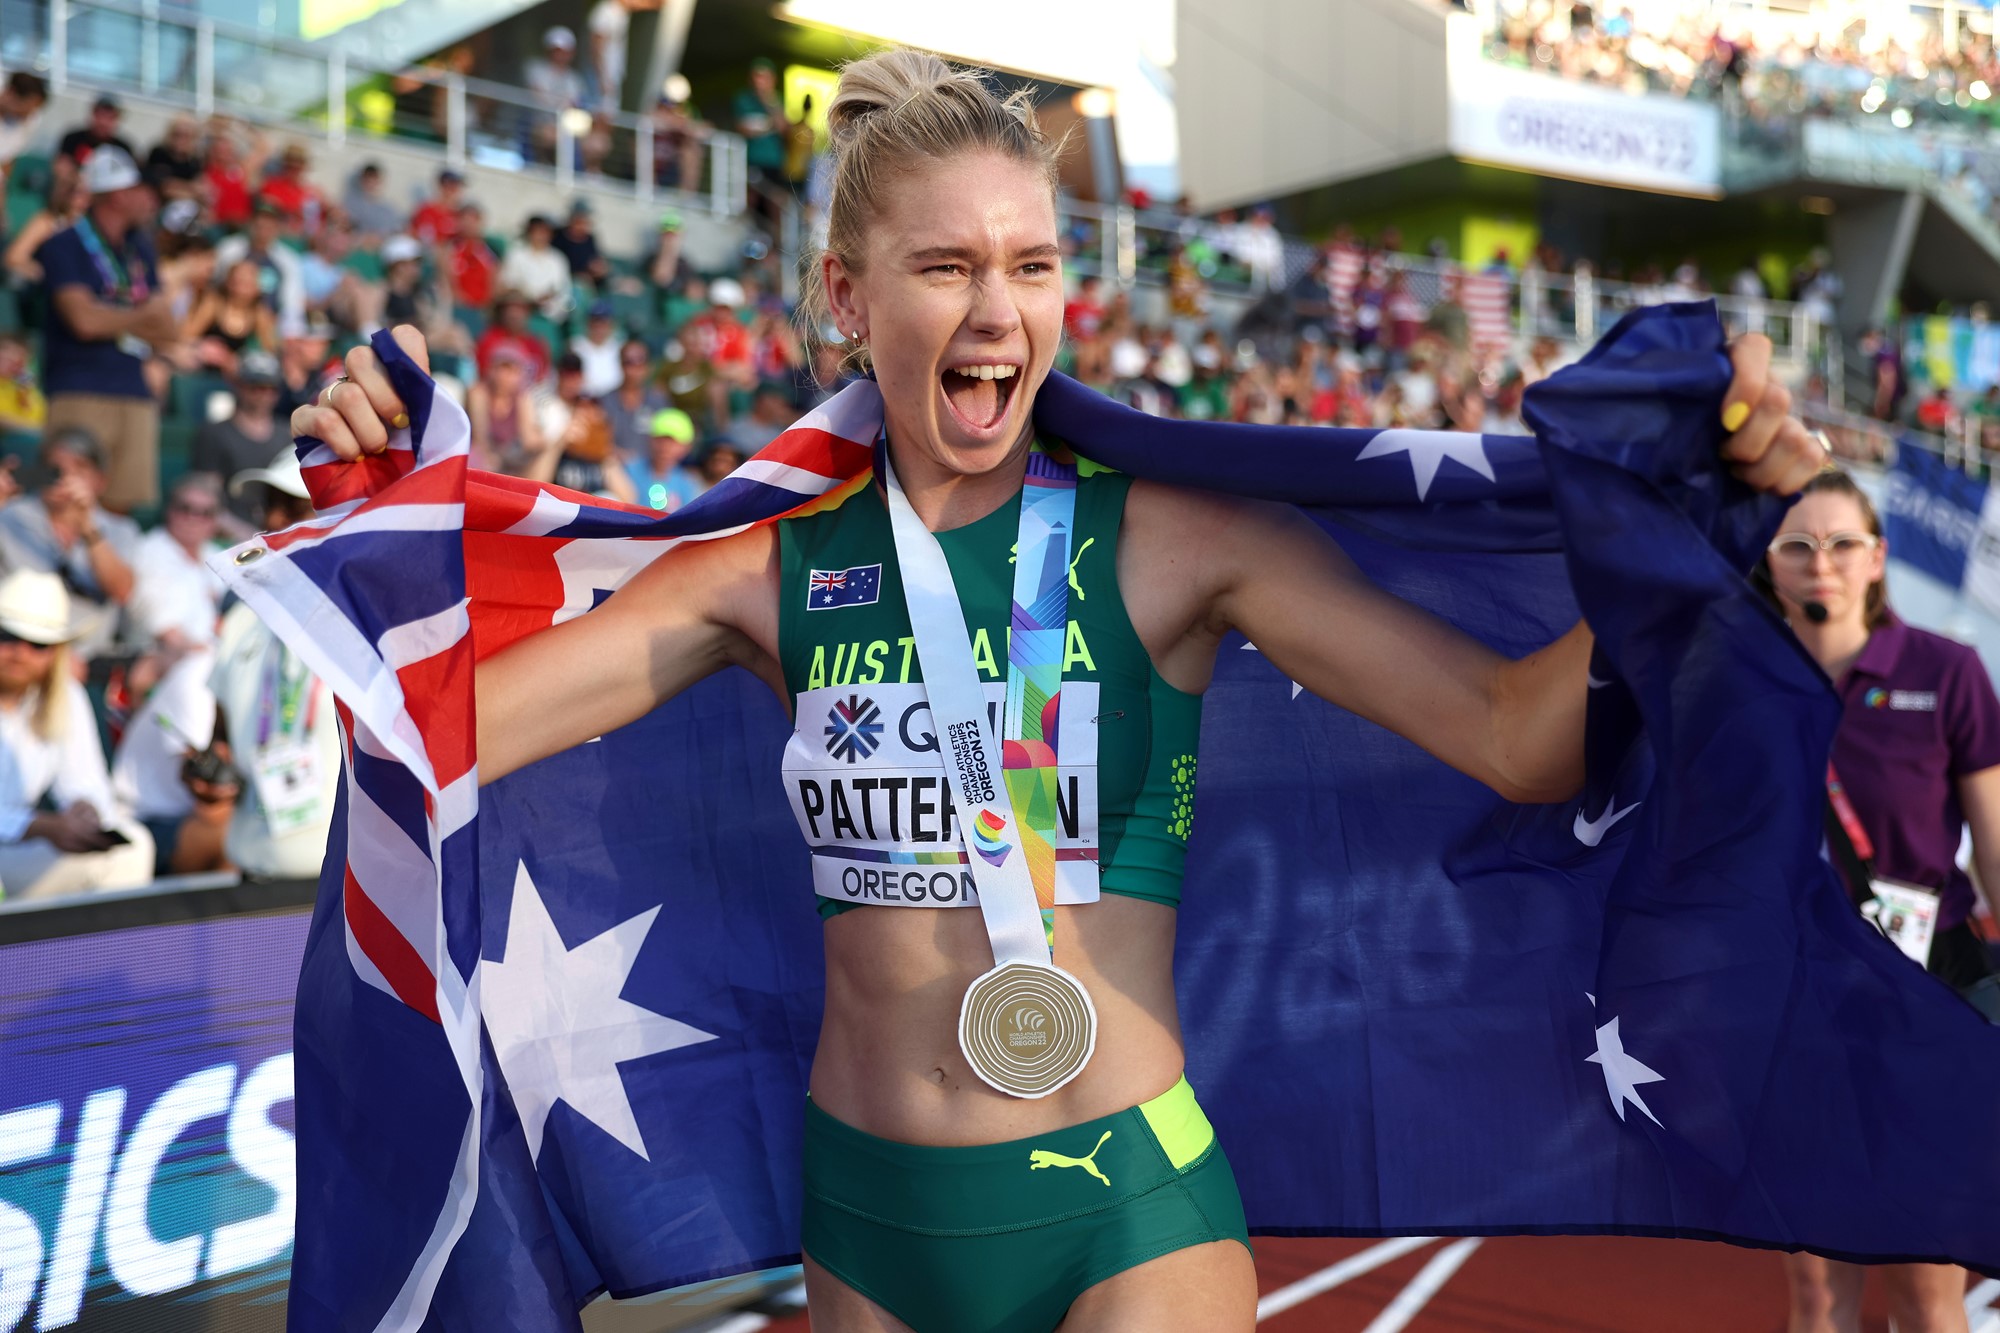 Eleanor Patterson smiles with an open mouth while wearing her high jump gold medal and draped in the Australian flag.